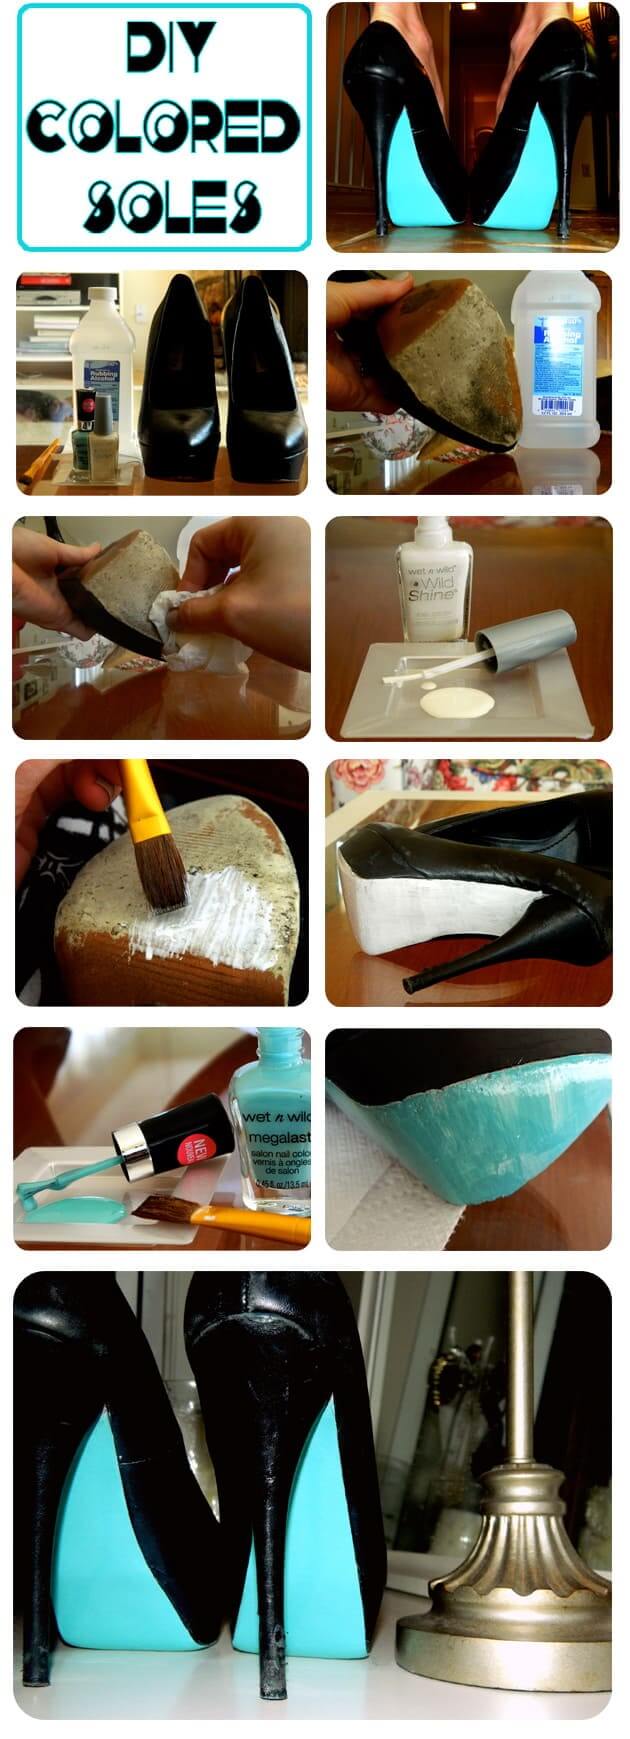 24 clever diy projects